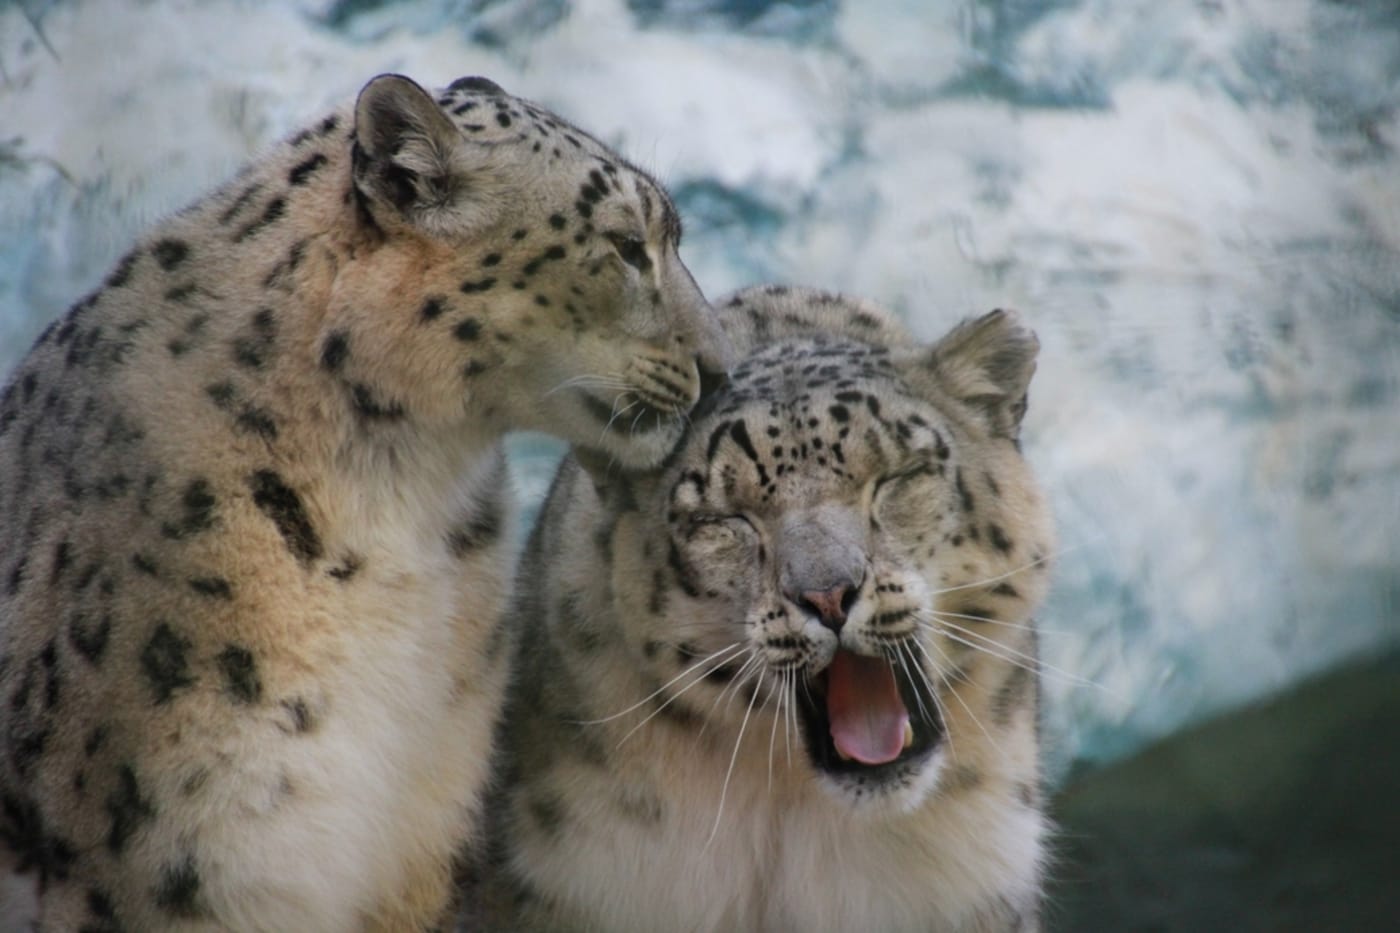 Two snow leopards, one is yawning